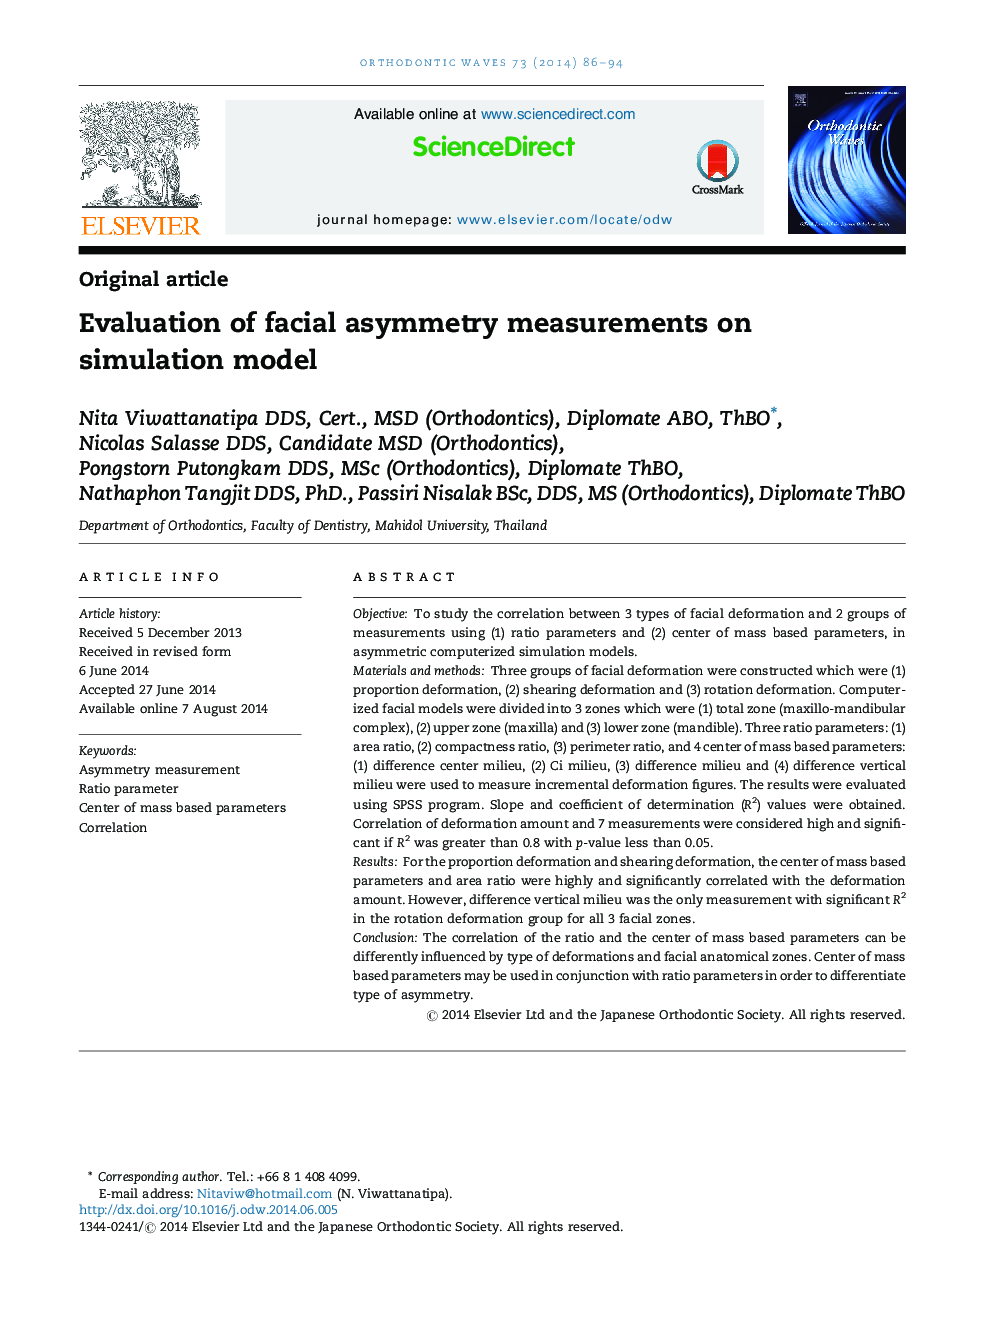 Evaluation of facial asymmetry measurements on simulation model